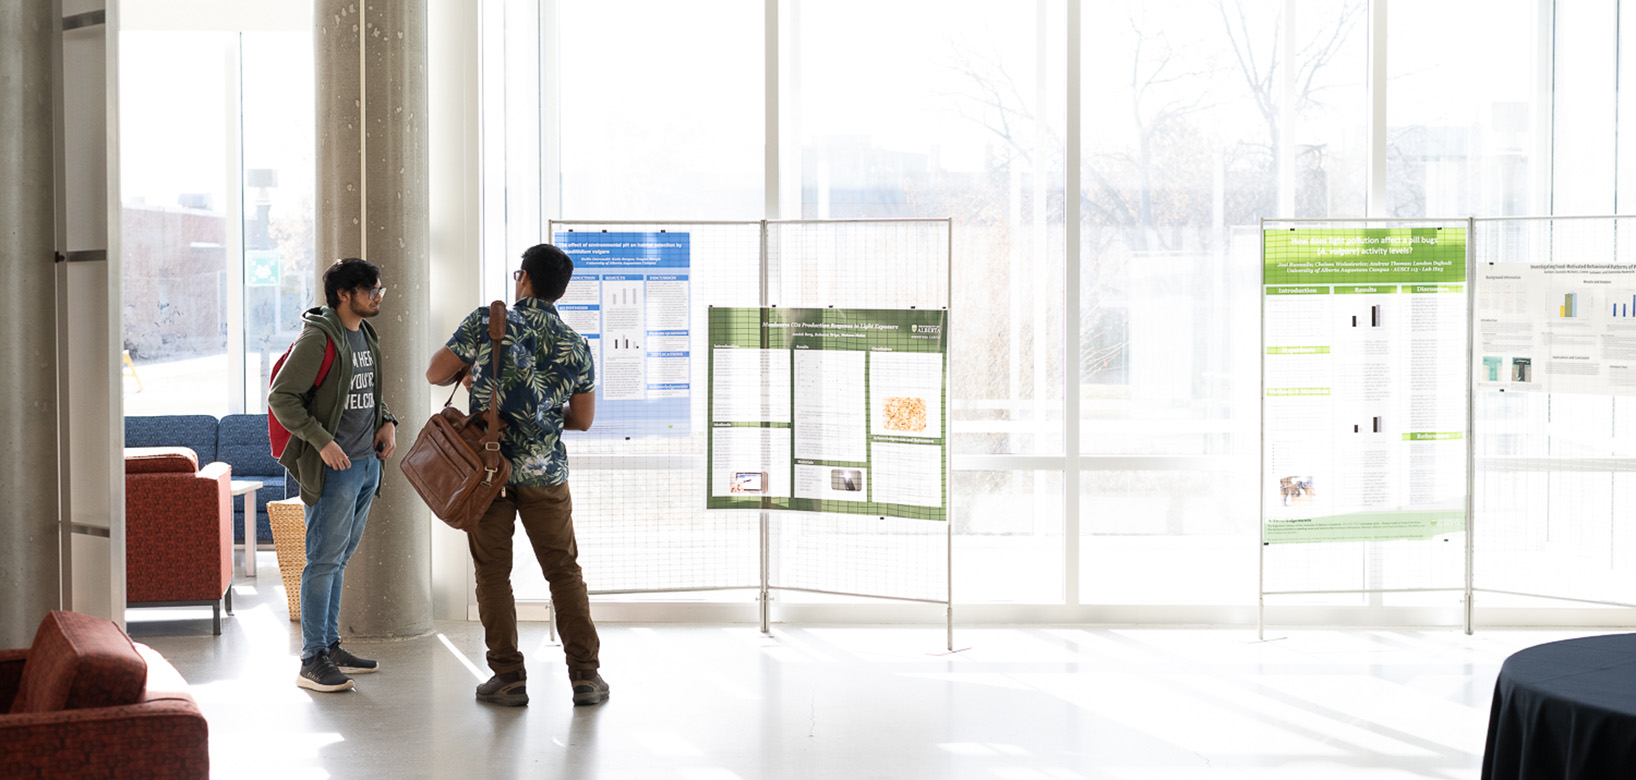 Two people standing in front of a research poster and chatting.